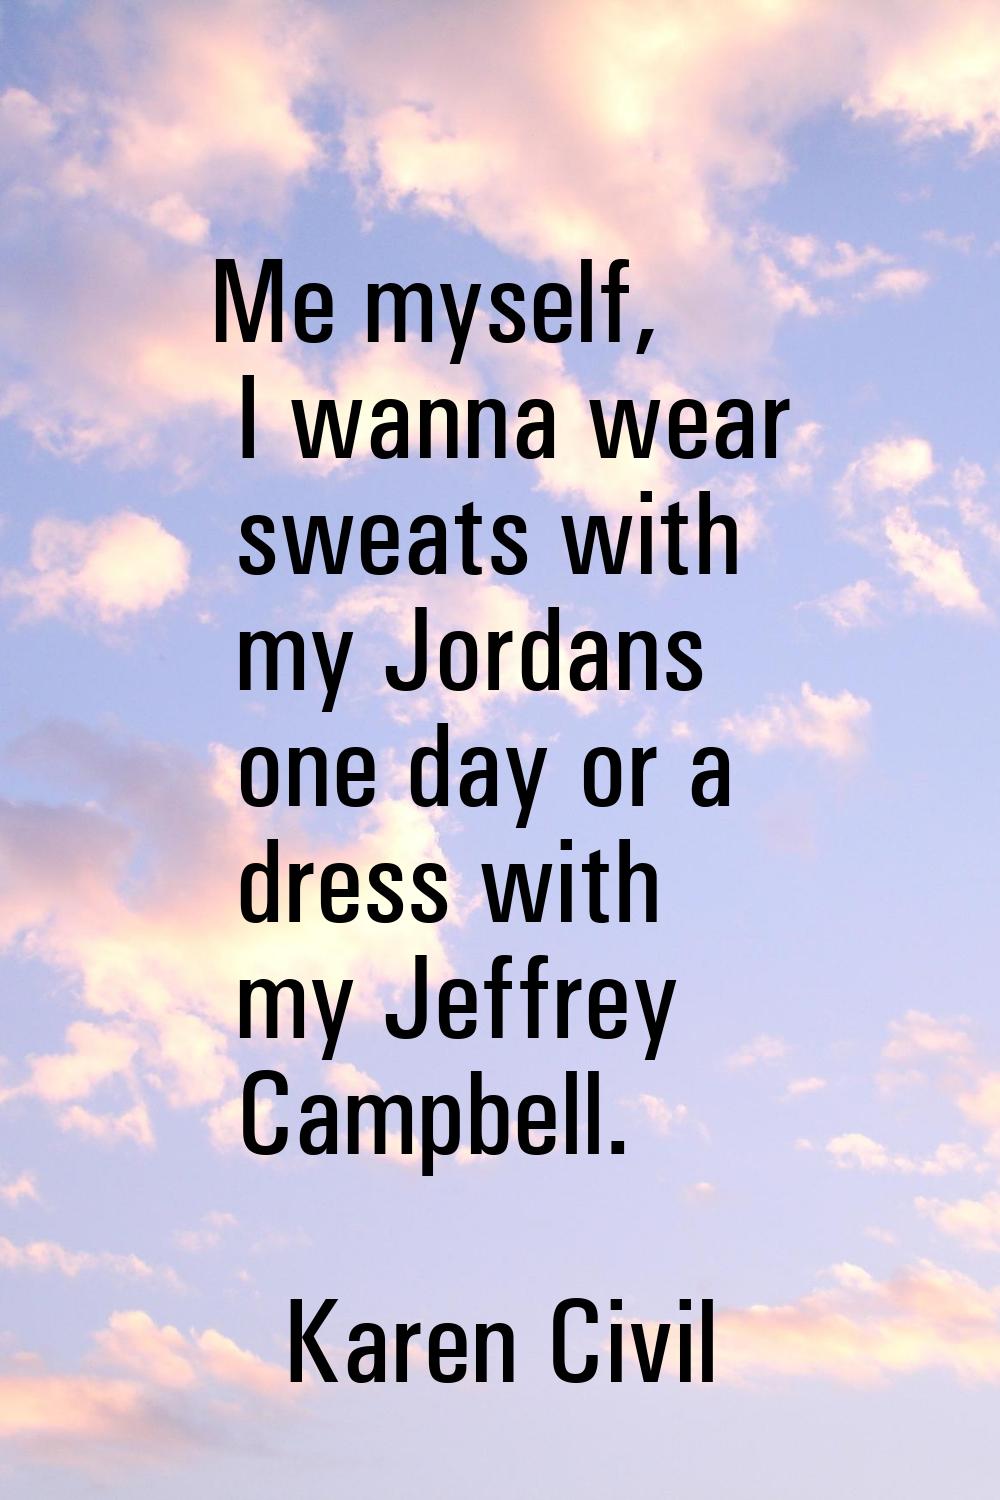 Me myself, I wanna wear sweats with my Jordans one day or a dress with my Jeffrey Campbell.